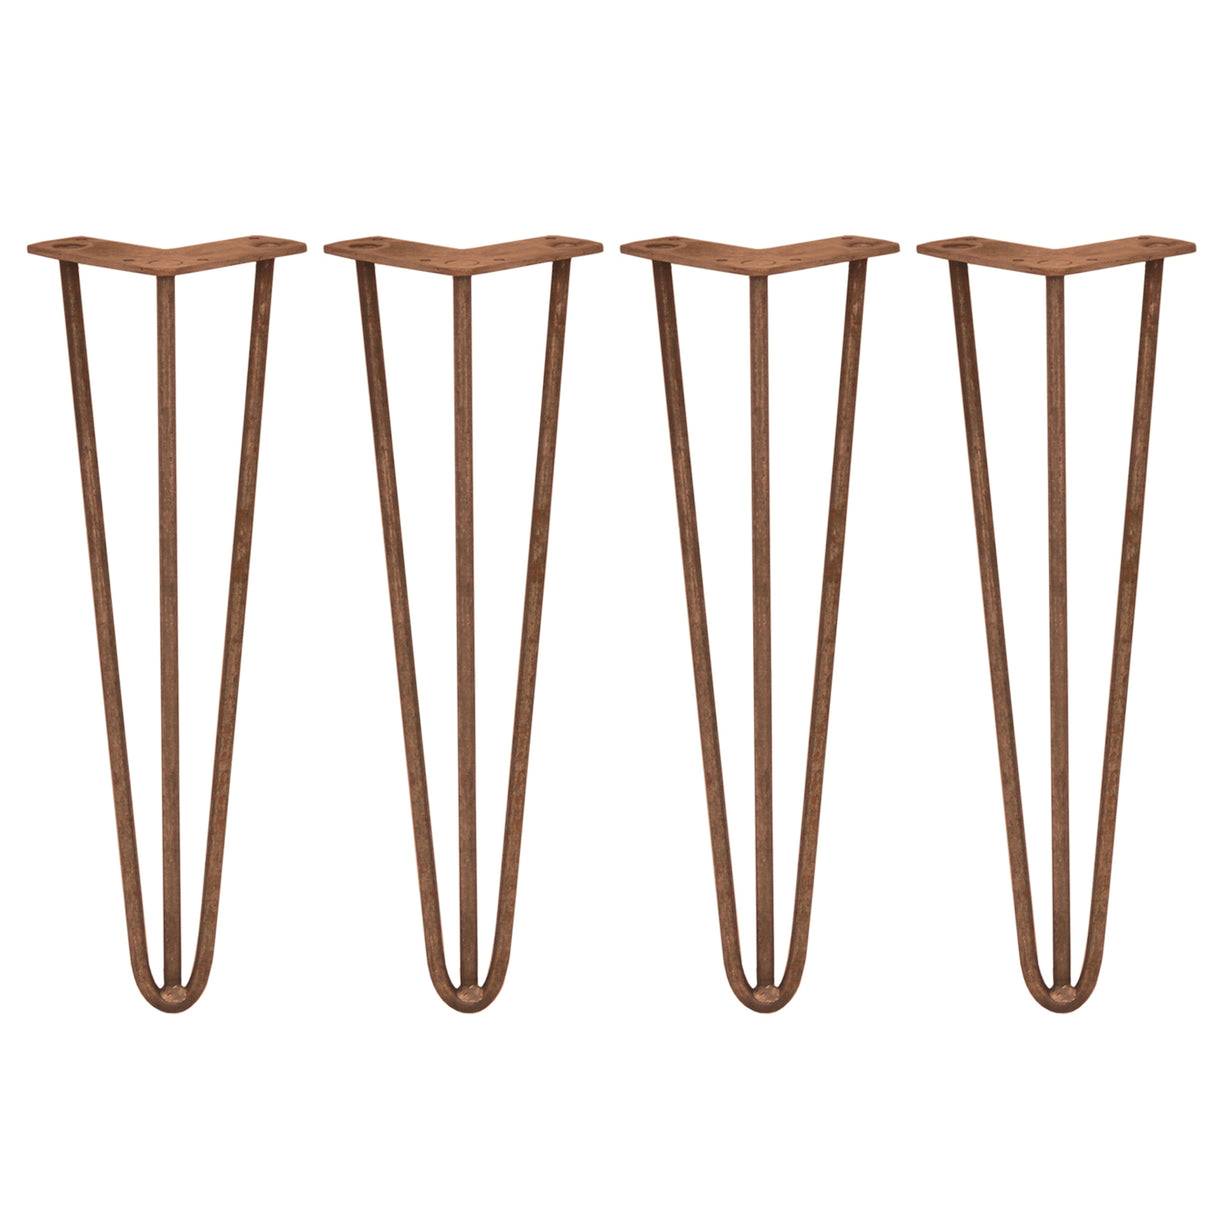 4 x 16" Hairpin Legs - 3 Prong - 10mm - Antique Copper